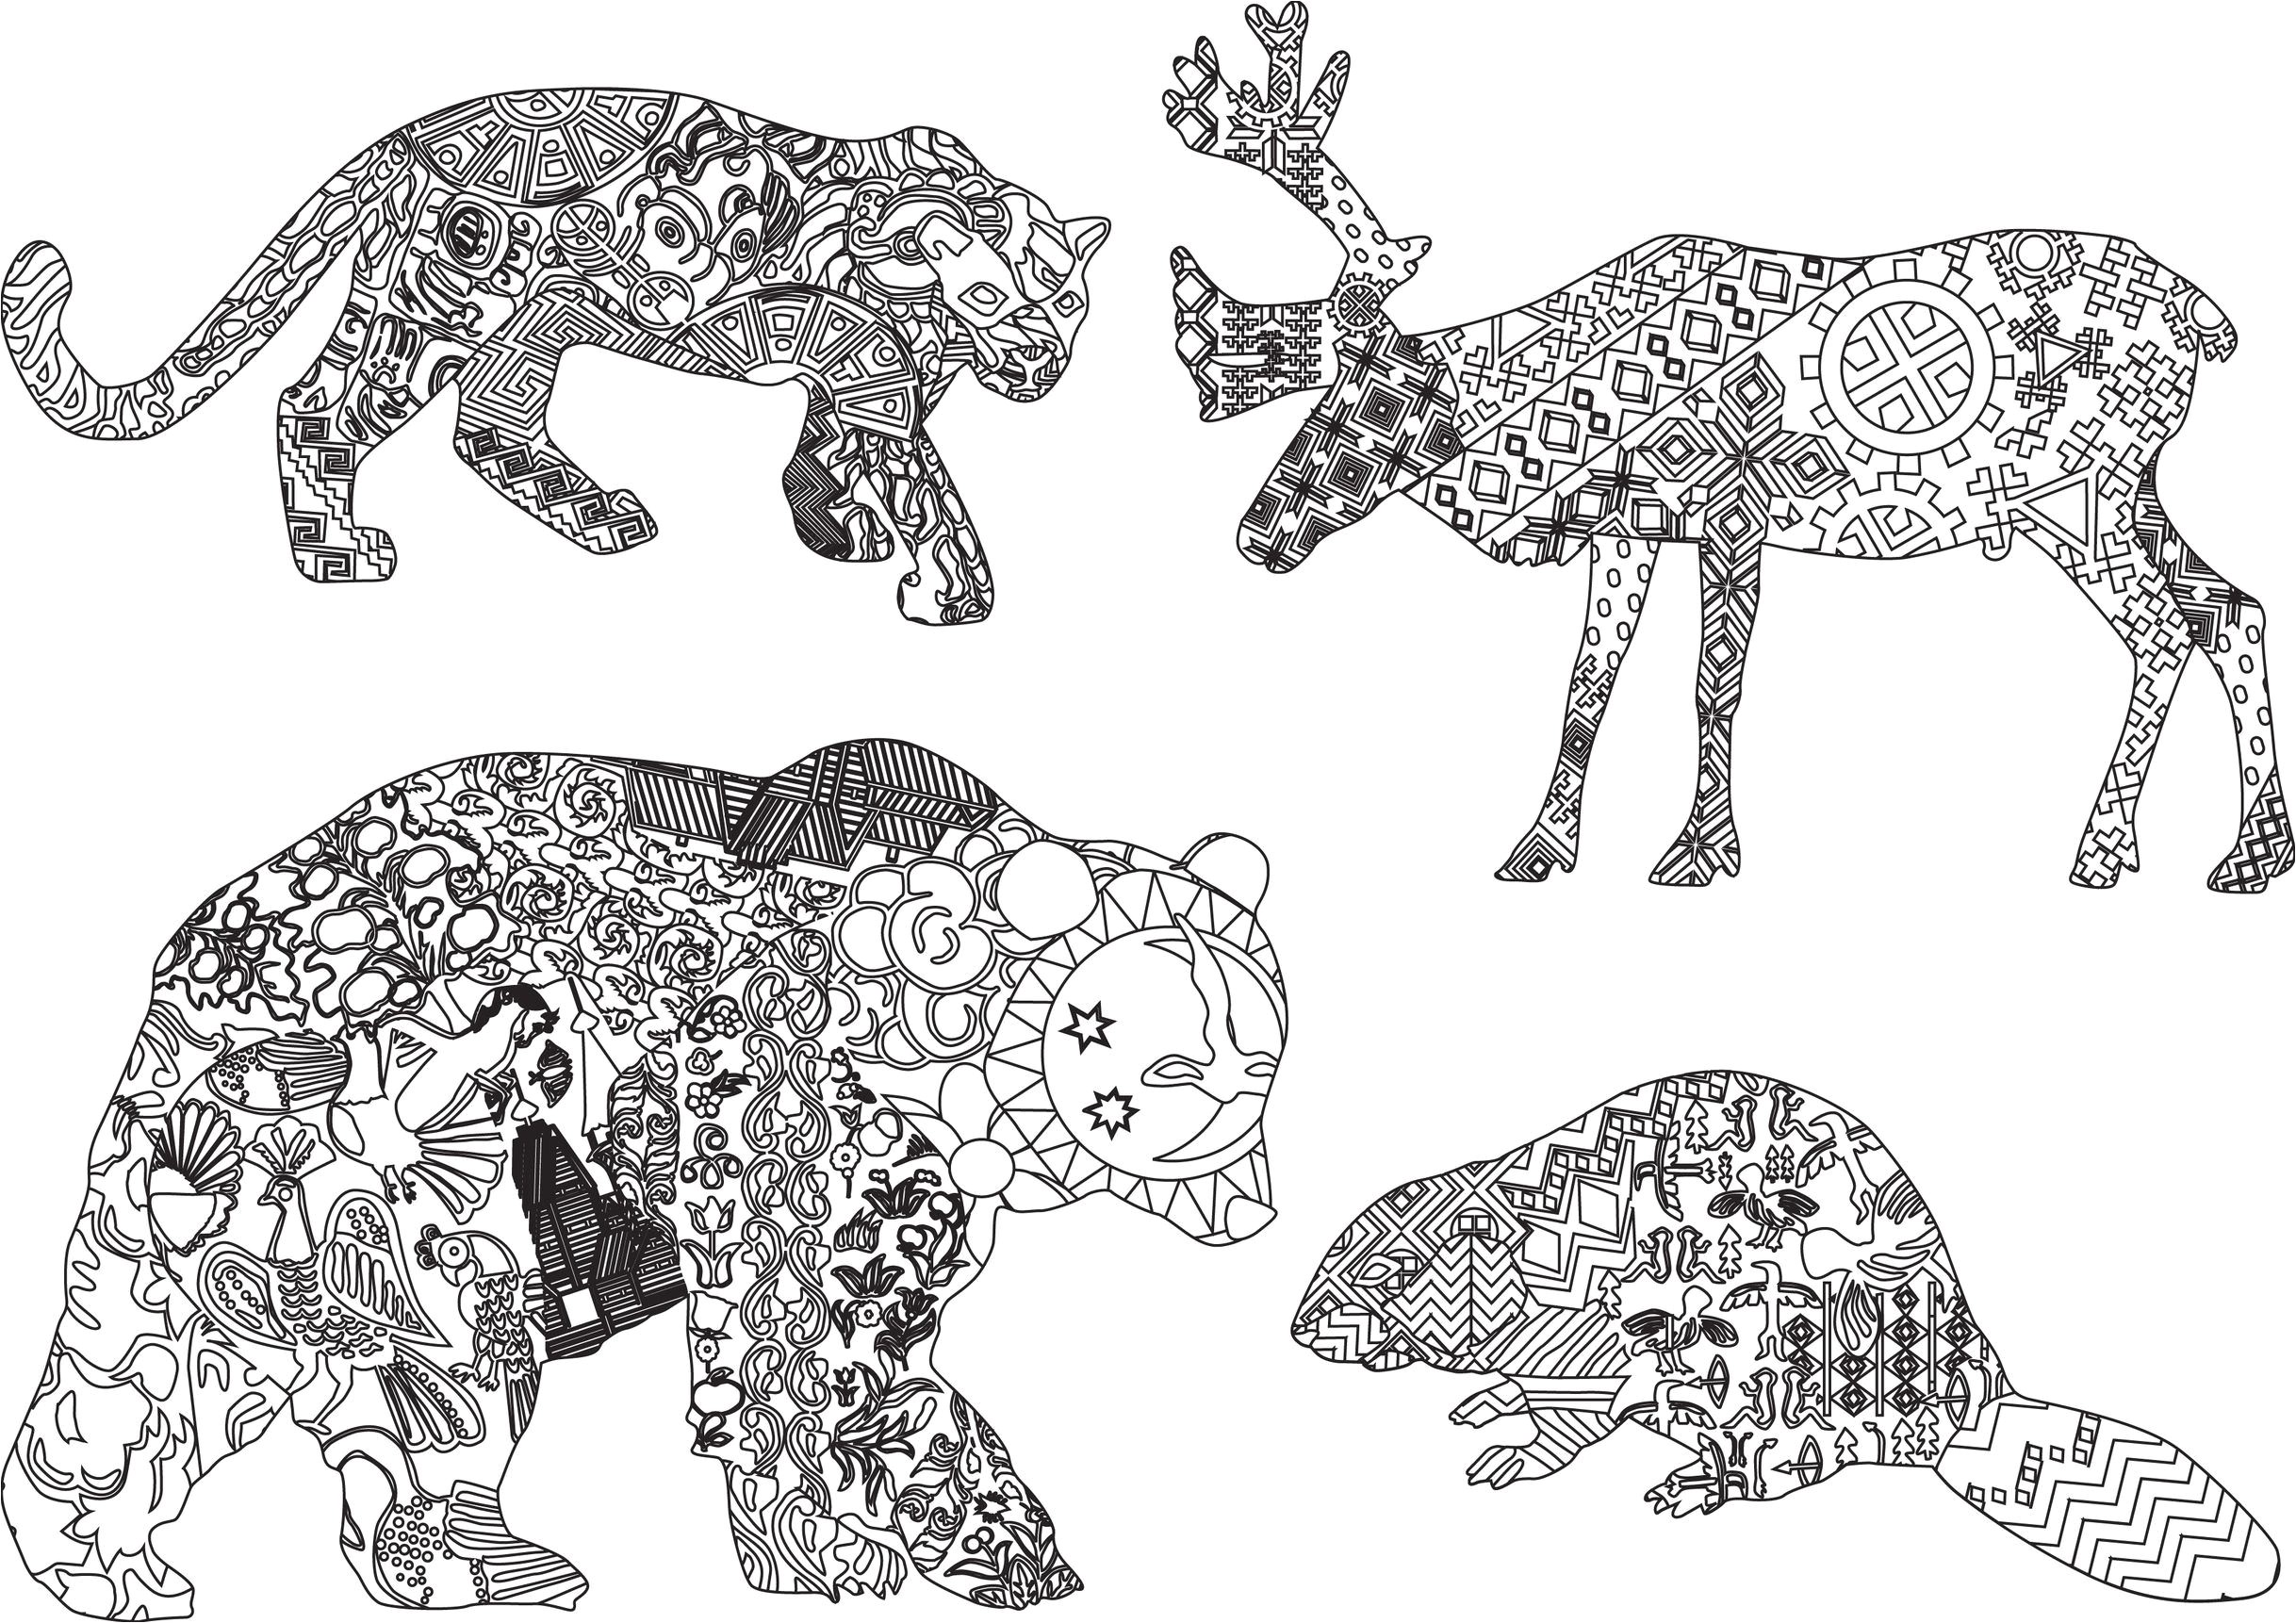 Coloriage Animaux Sauvages Difficile Coloriage Anti Stress Animaux Tigre